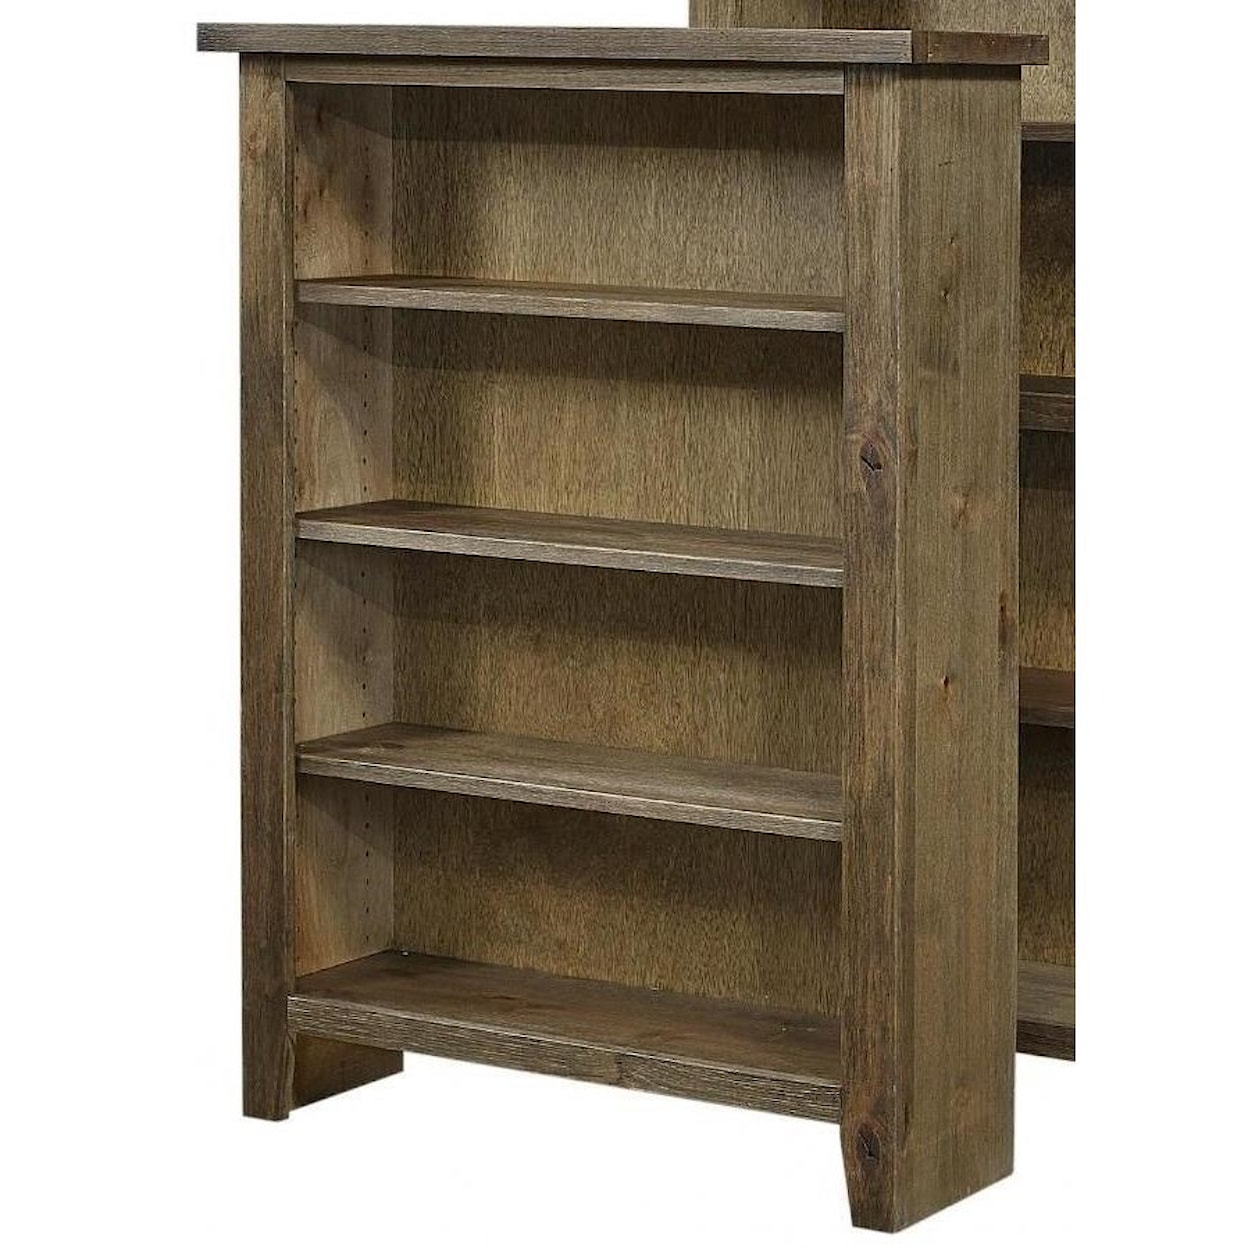 Aspenhome Alder Grove Bookcase 48" Height with 3 Shelves